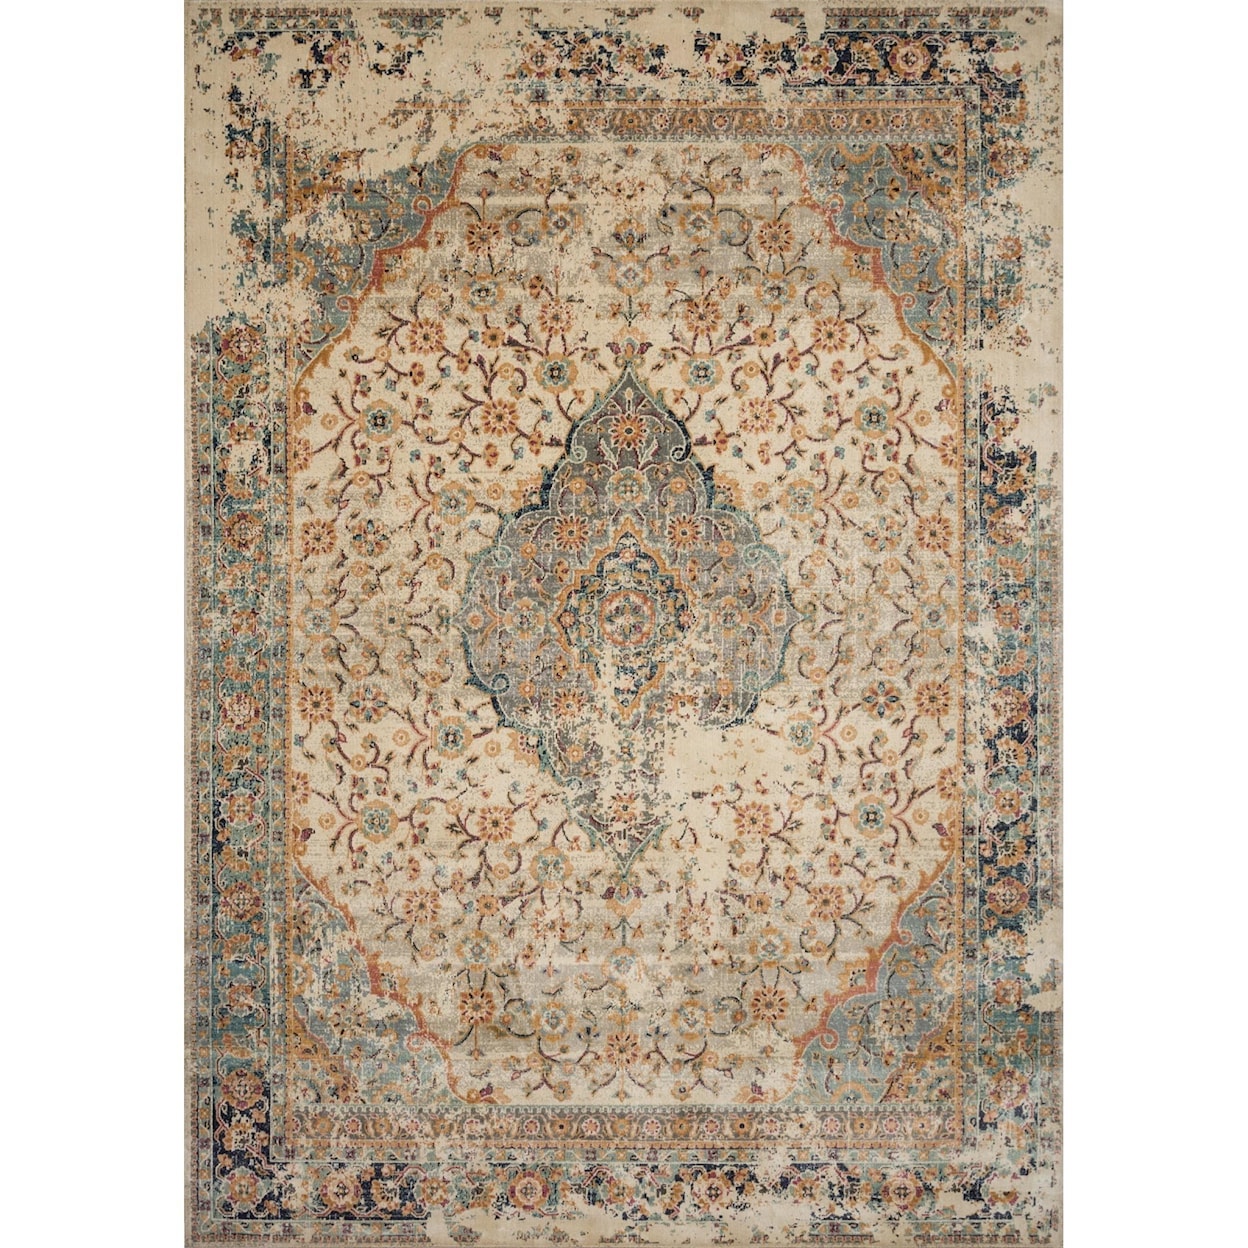 Magnolia Home by Joanna Gaines for Loloi Evie 11'-6" x 15' Rug